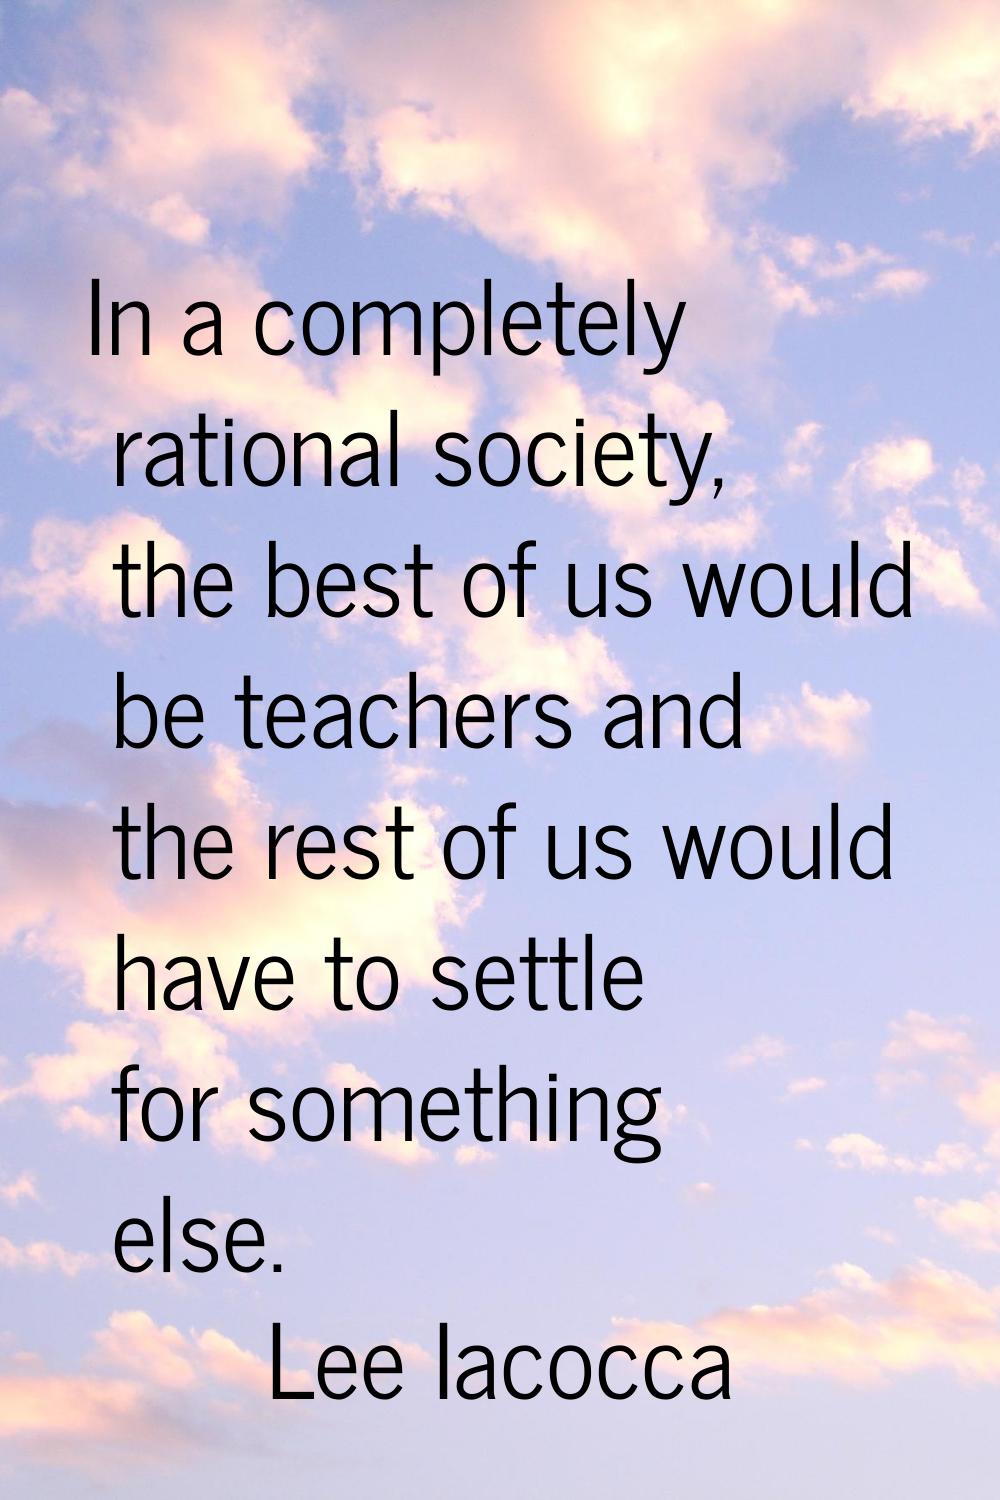 In a completely rational society, the best of us would be teachers and the rest of us would have to